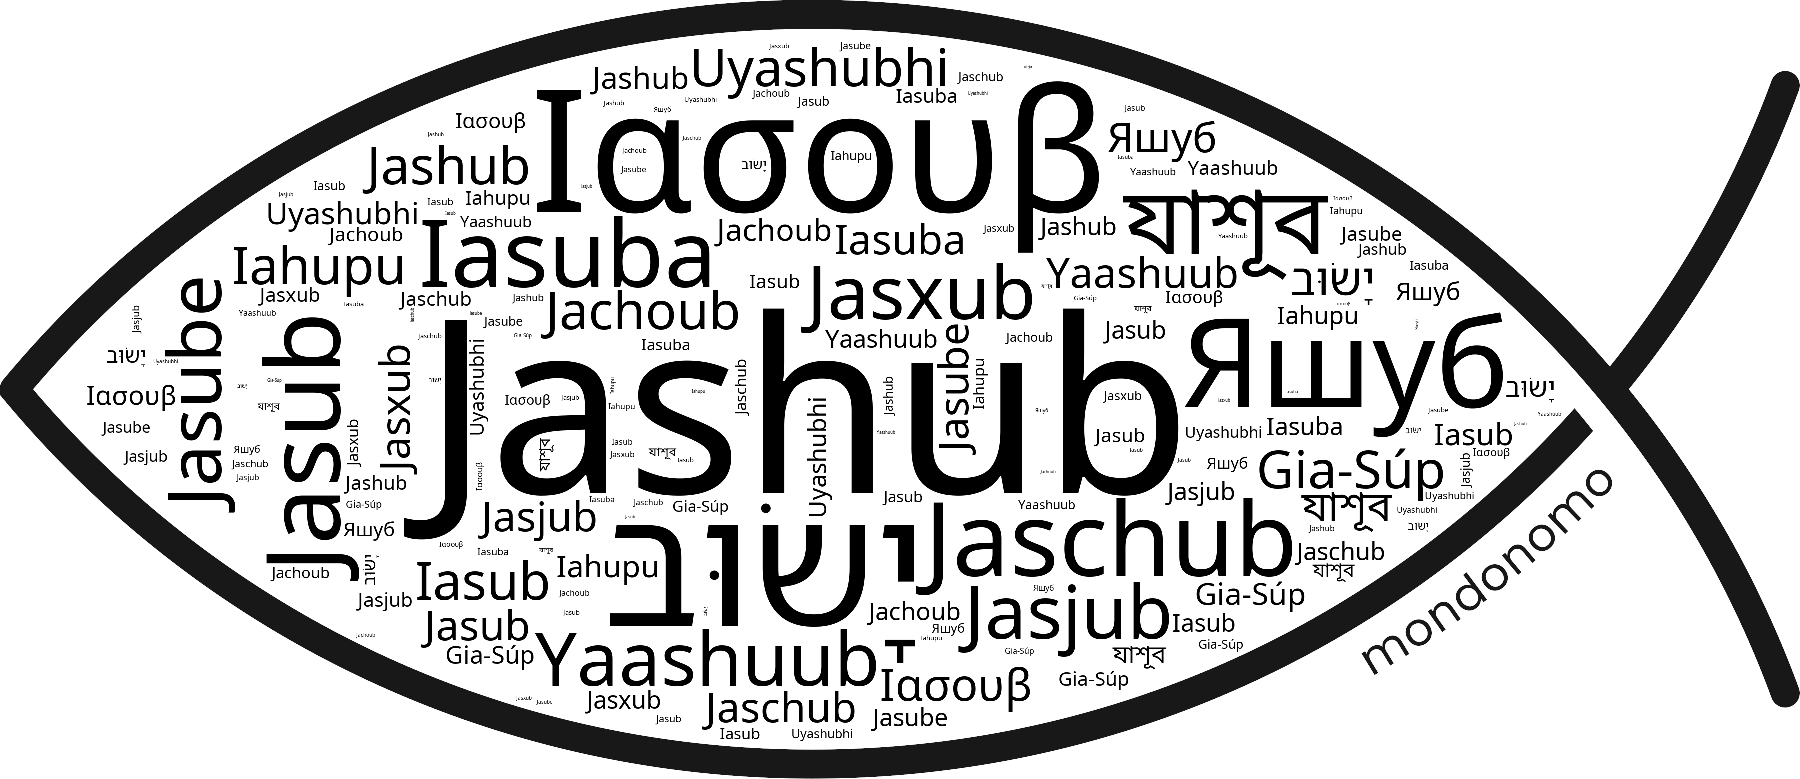 Name Jashub in the world's Bibles